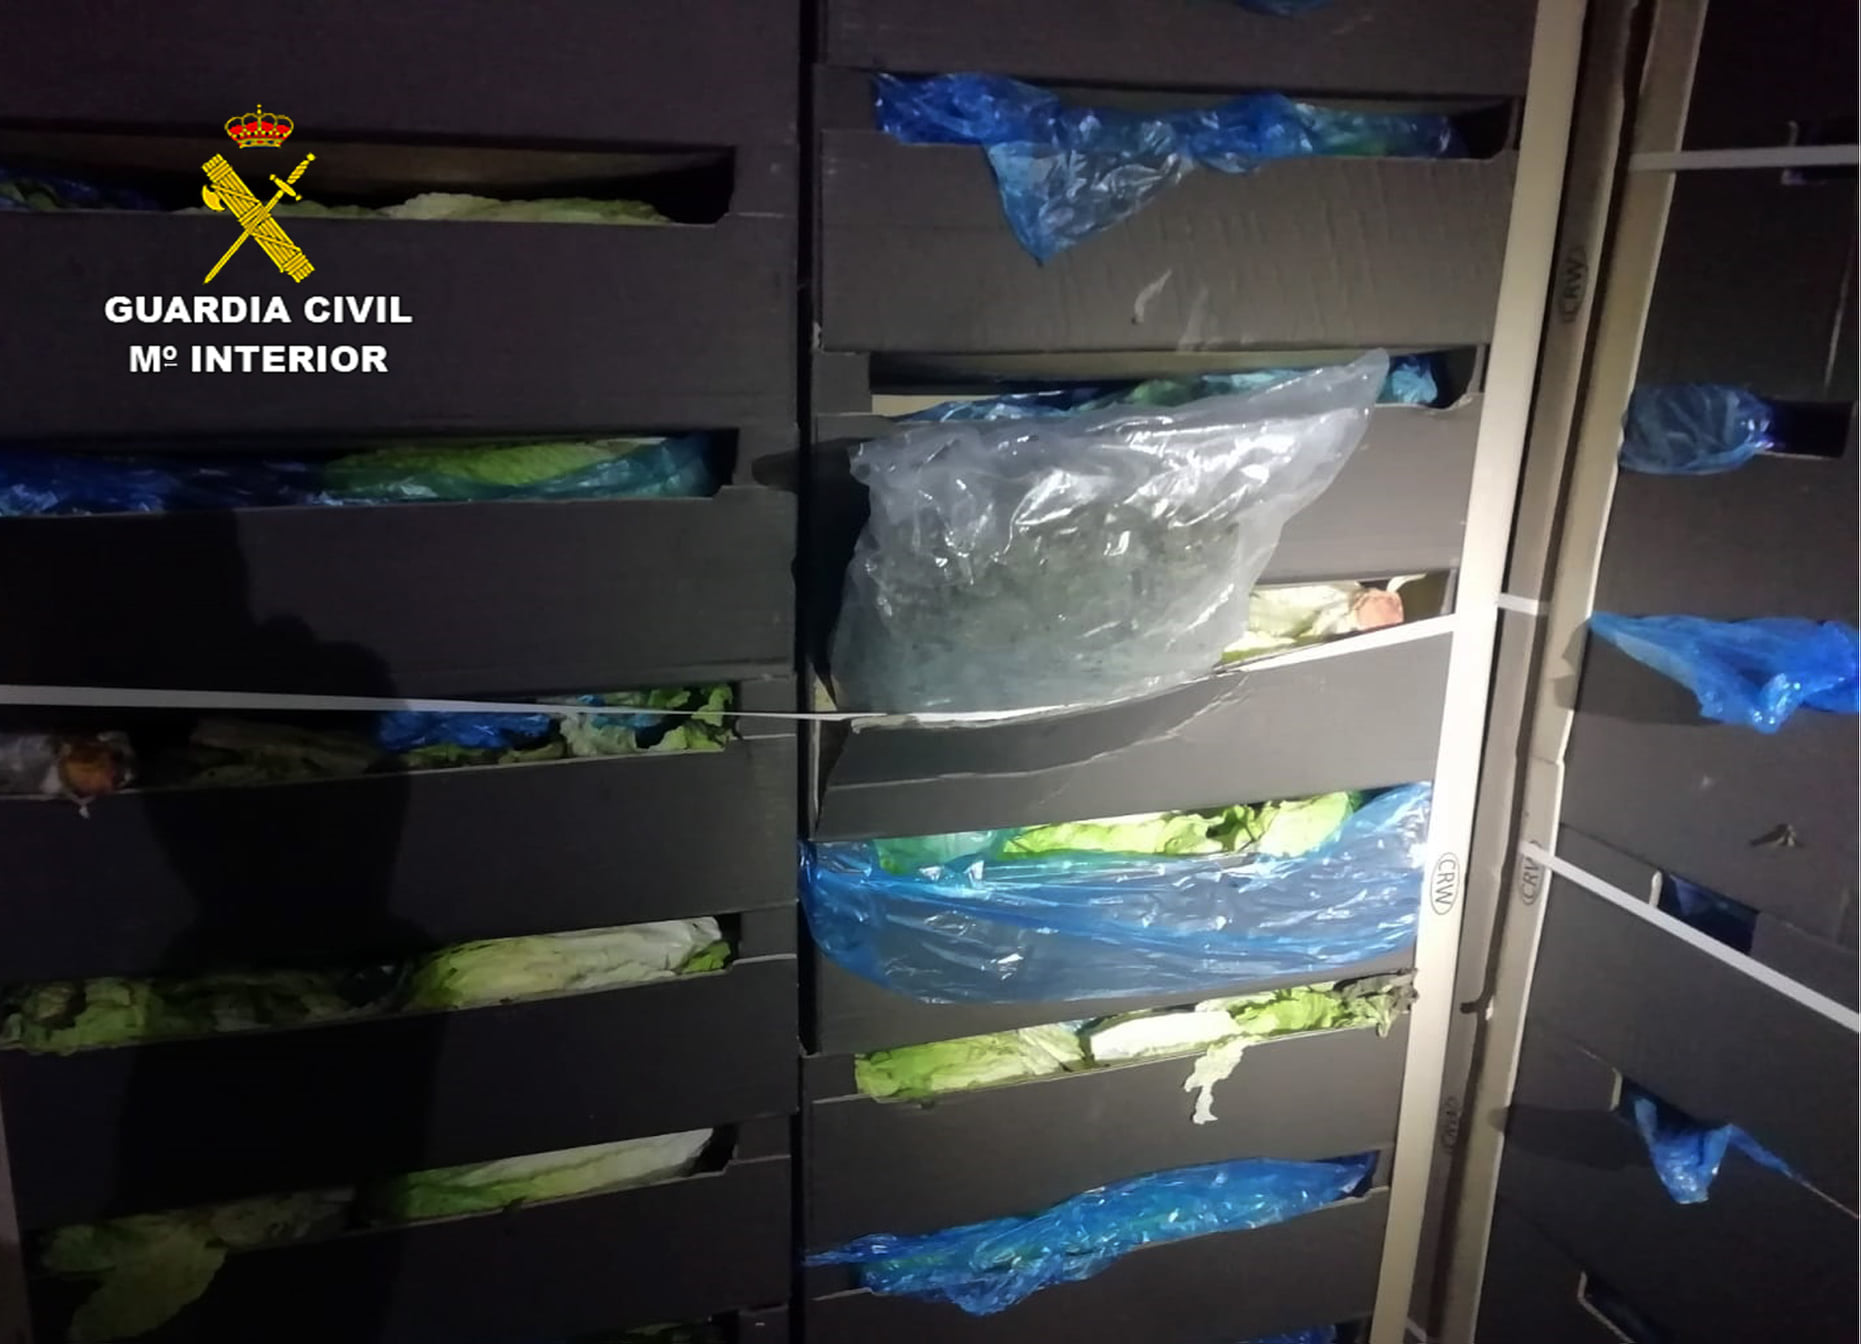 Lorries Carried Marijuana Concealed In Lettuce Crates From Murcia Area Of Spain To Ireland